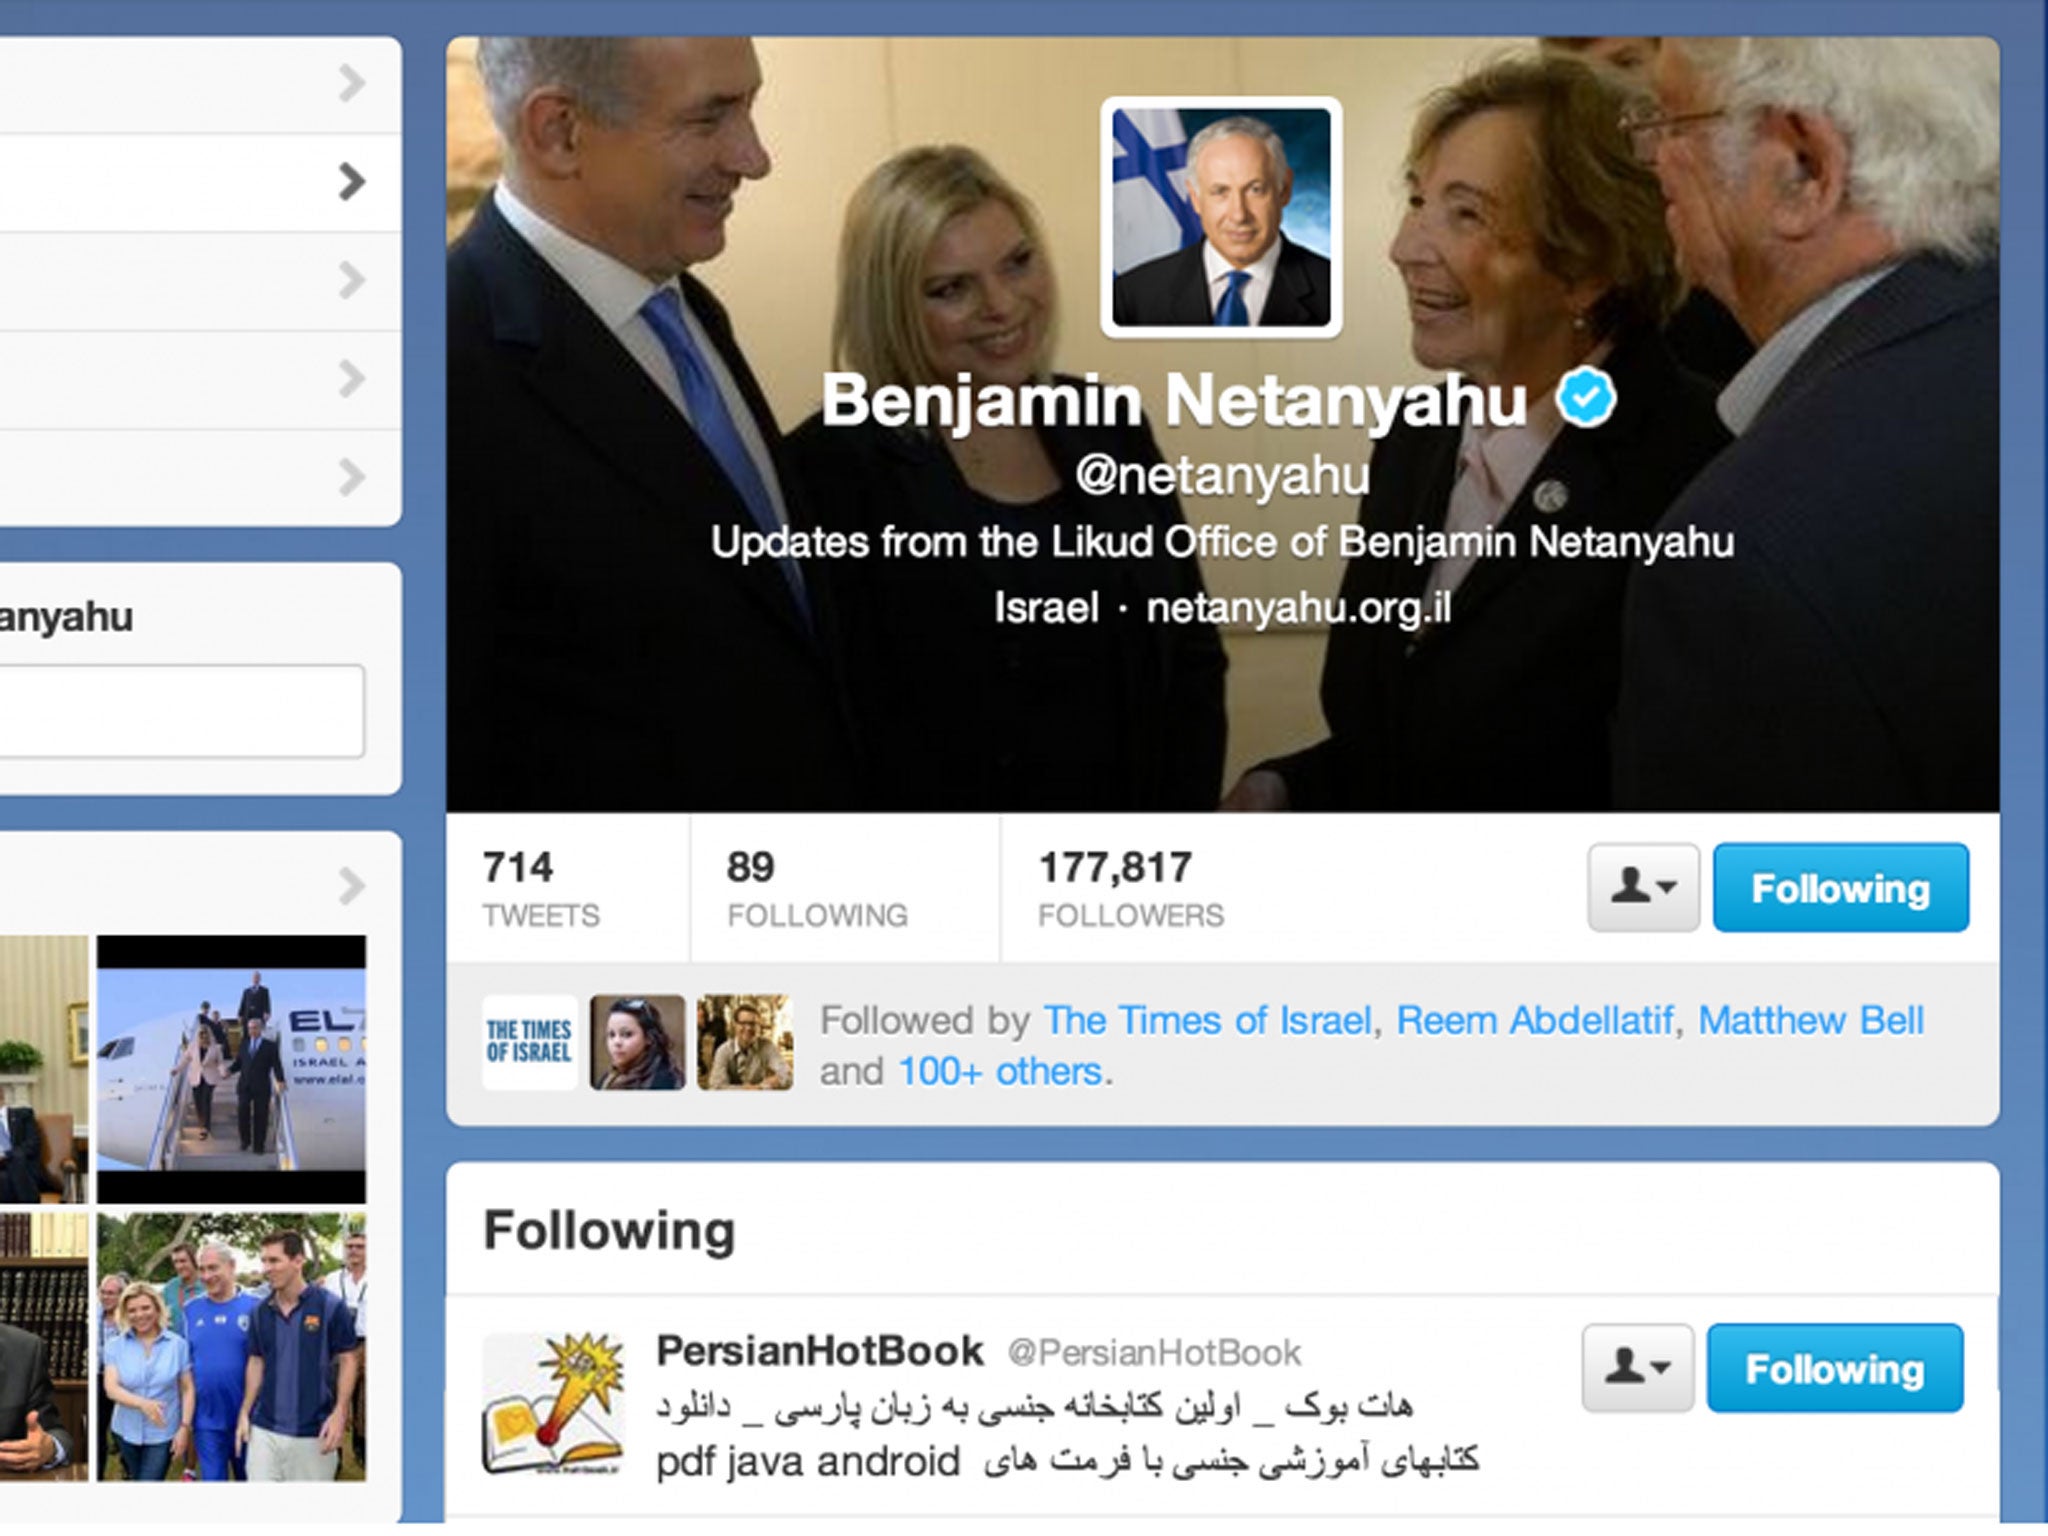 A screenshot showing Israeli prime minister Benjamin Netanyahu's Twitter profile and the feed he has followed most recently - a 'library for hot sex books in the Persian language'